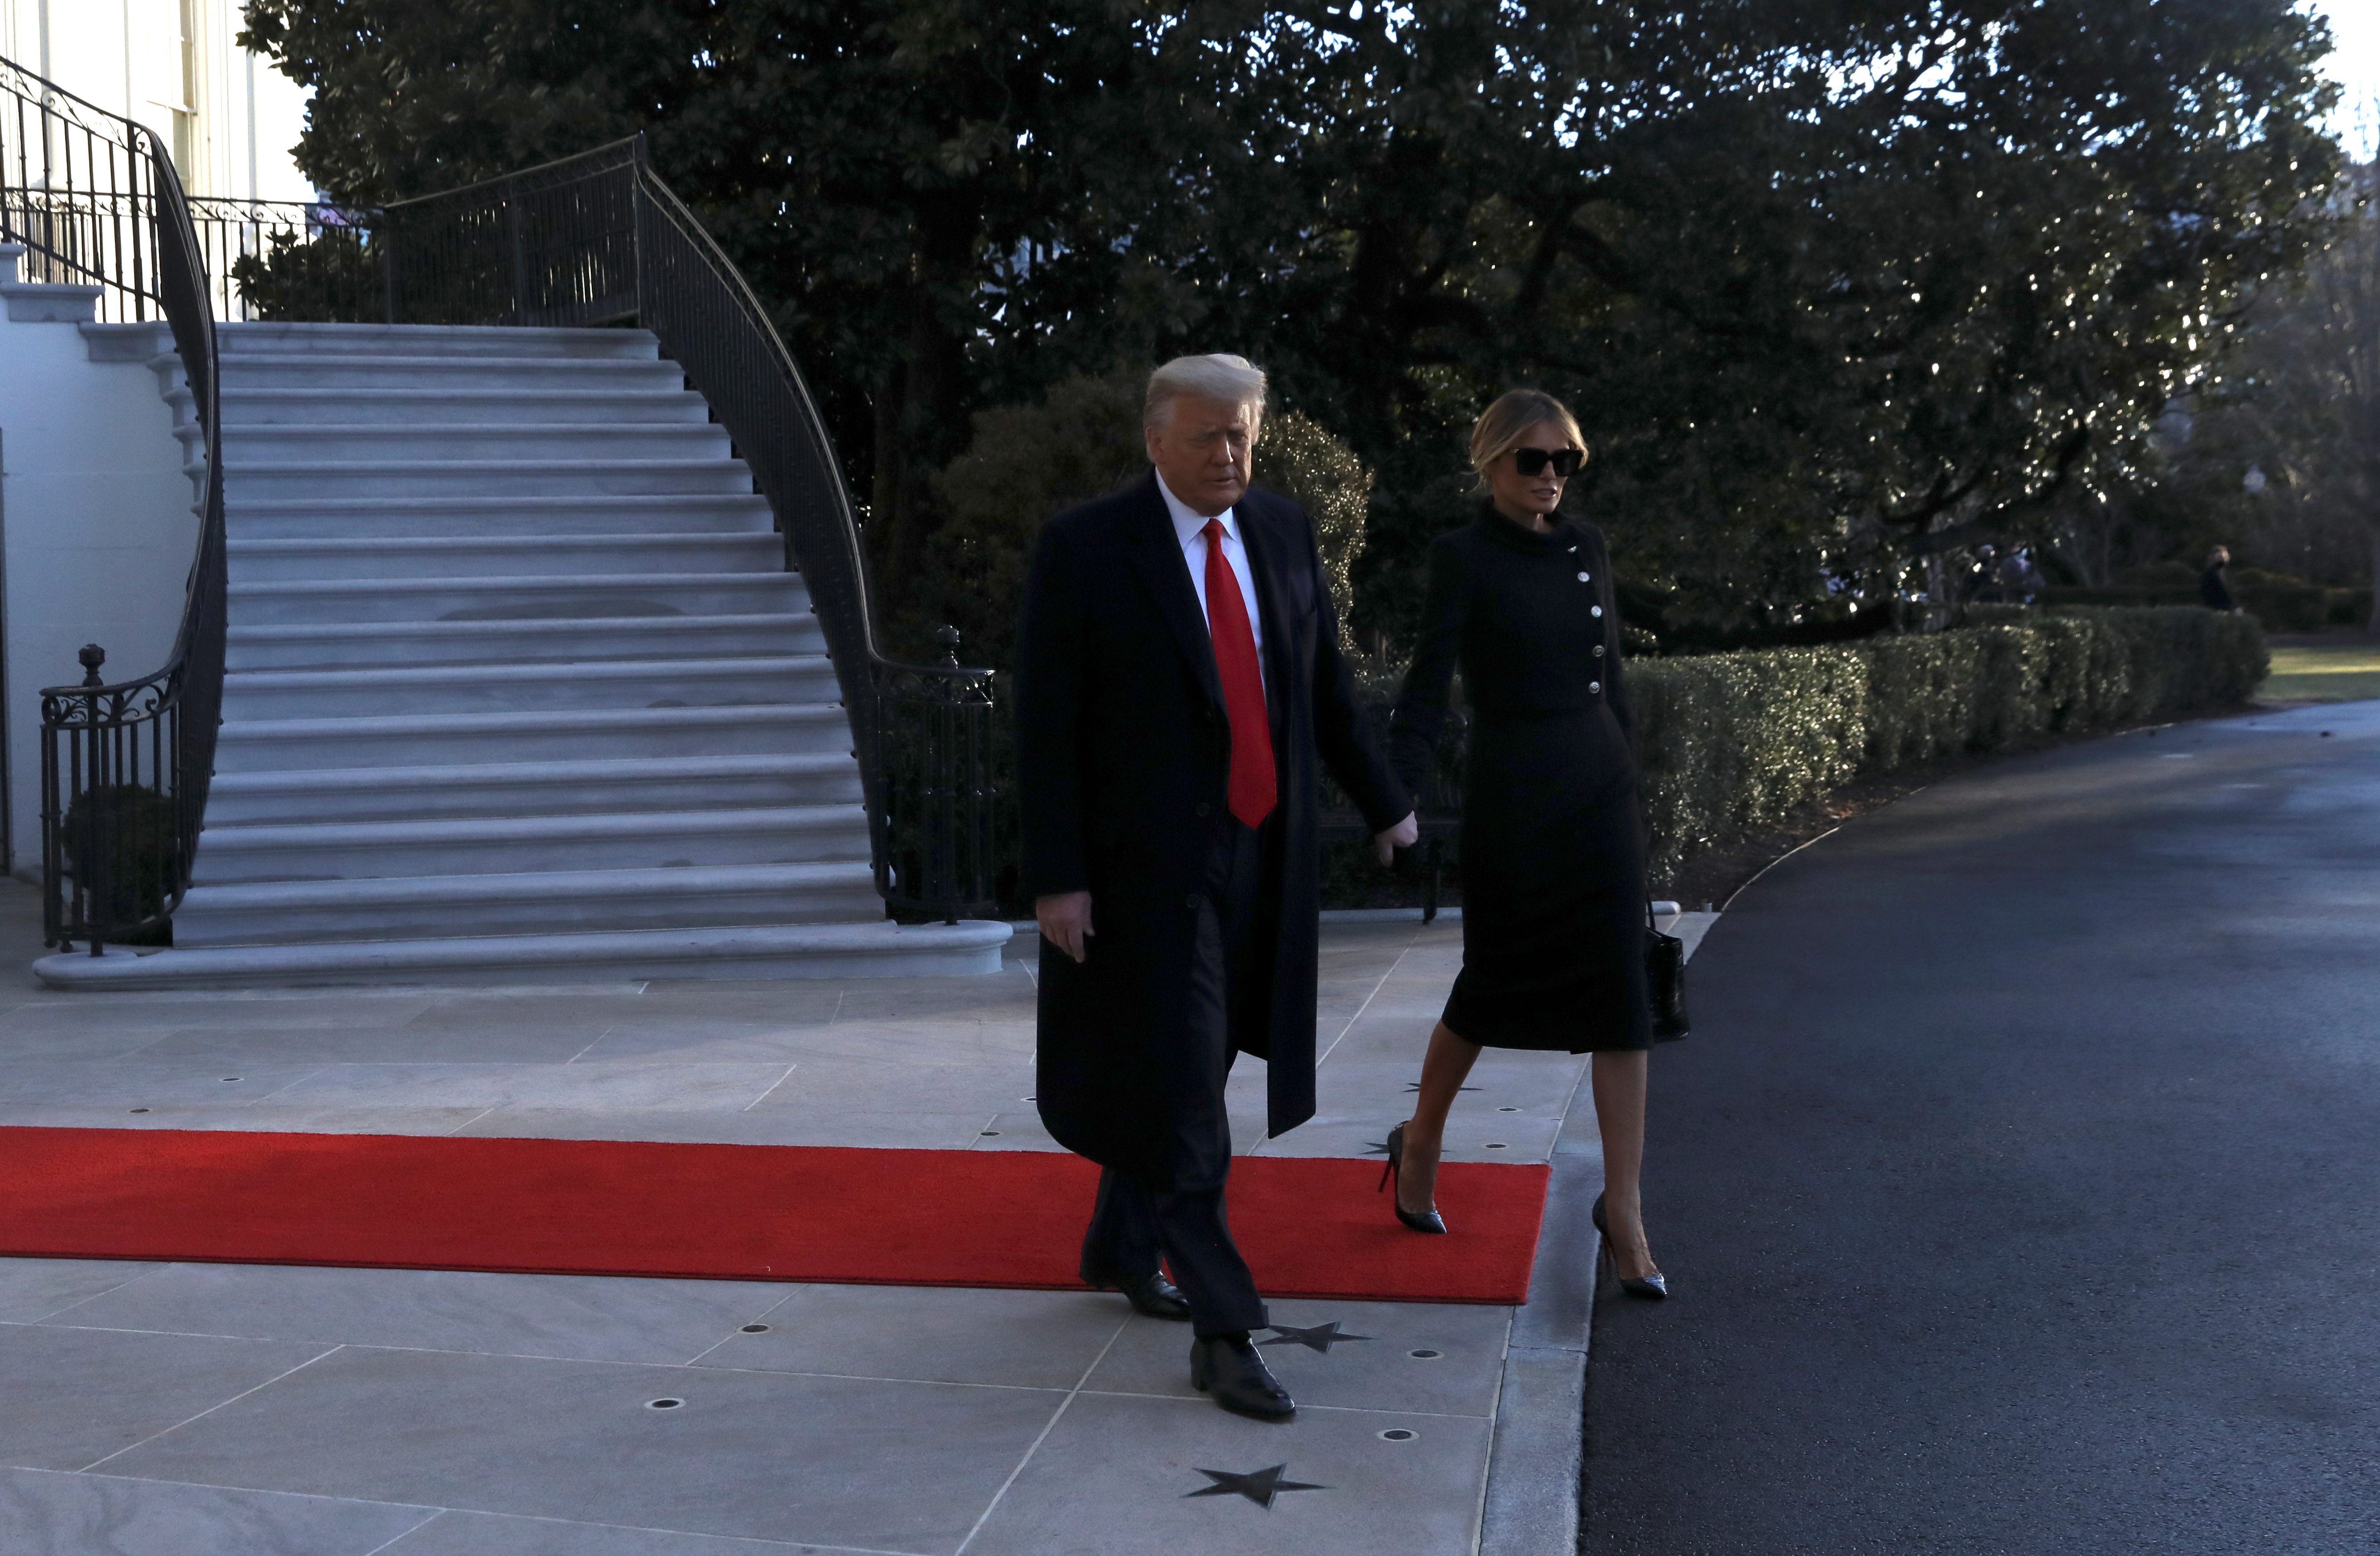 LOOK: After 4 years, Donald Trump leaves White House